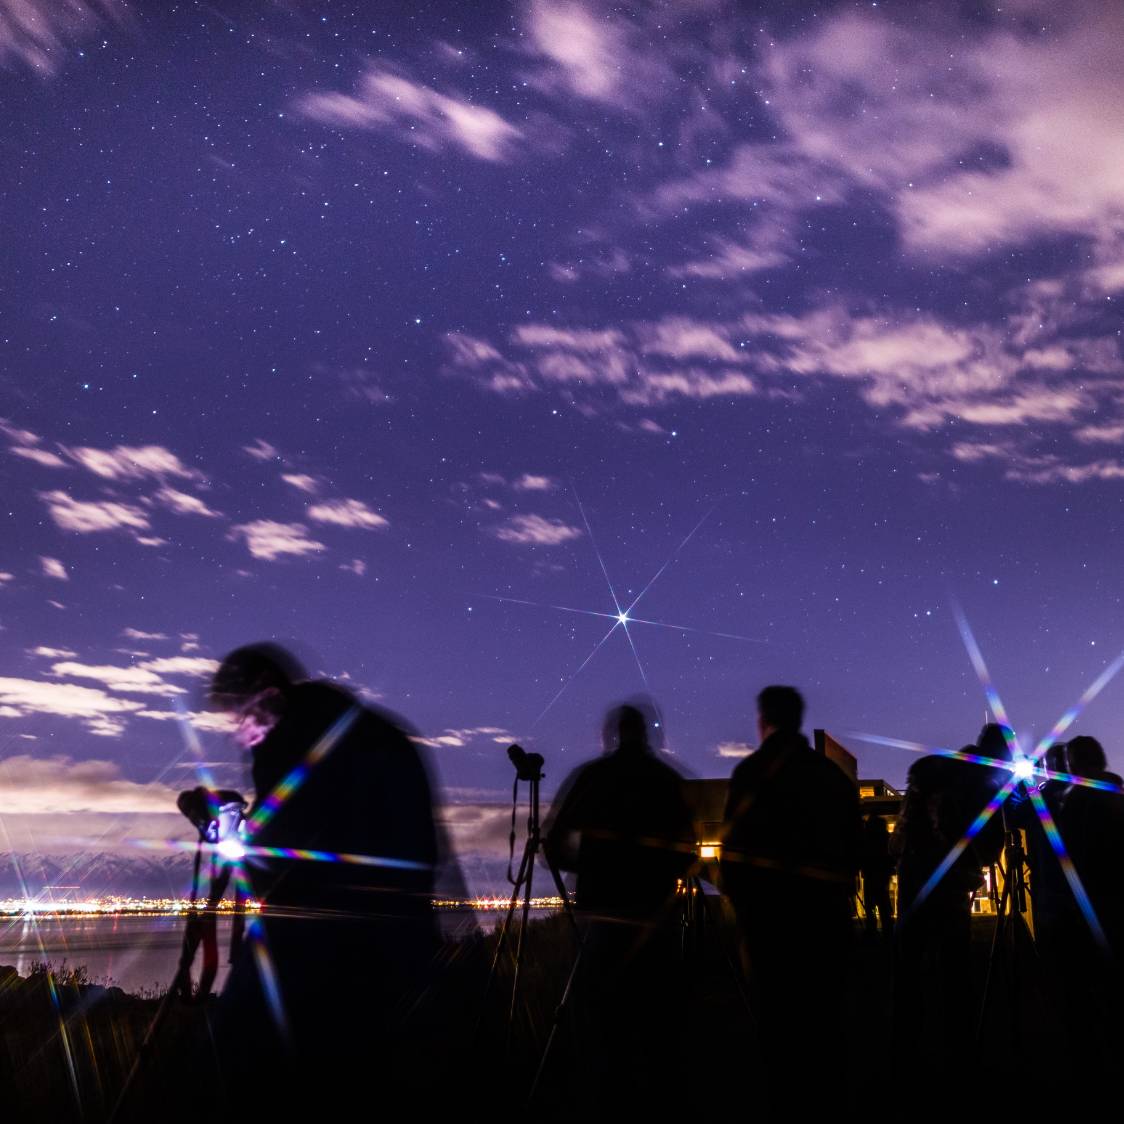 Astro-photography event at Antelope Island State Park